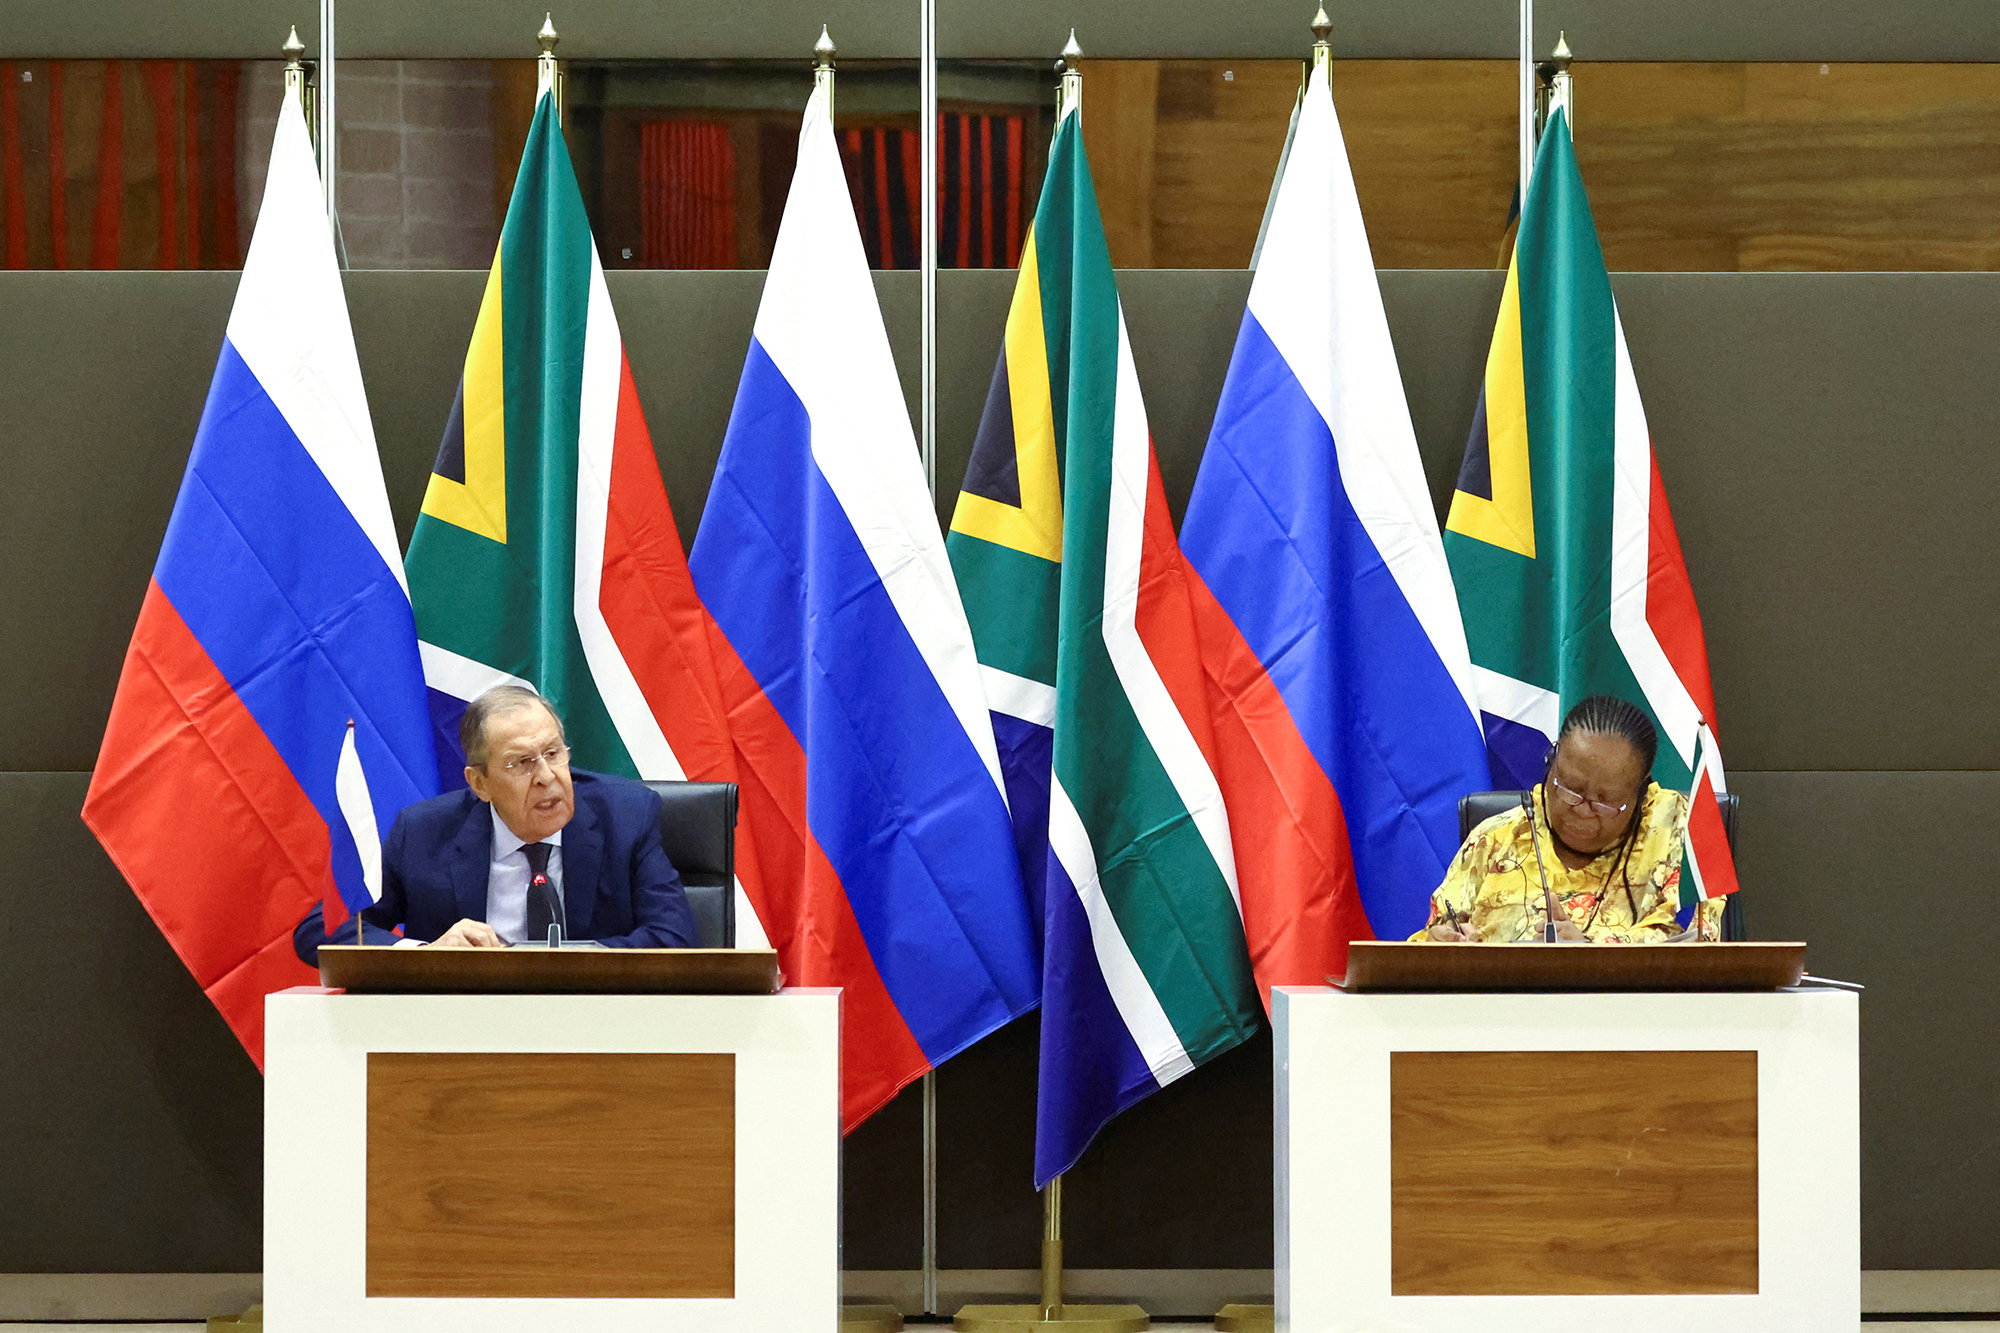 South Africa's Foreign Minister Naledi Pandor, right, and Russia's Foreign Minister Sergei Lavrov attend a media briefing, in Pretoria, South Africa, on January 23.